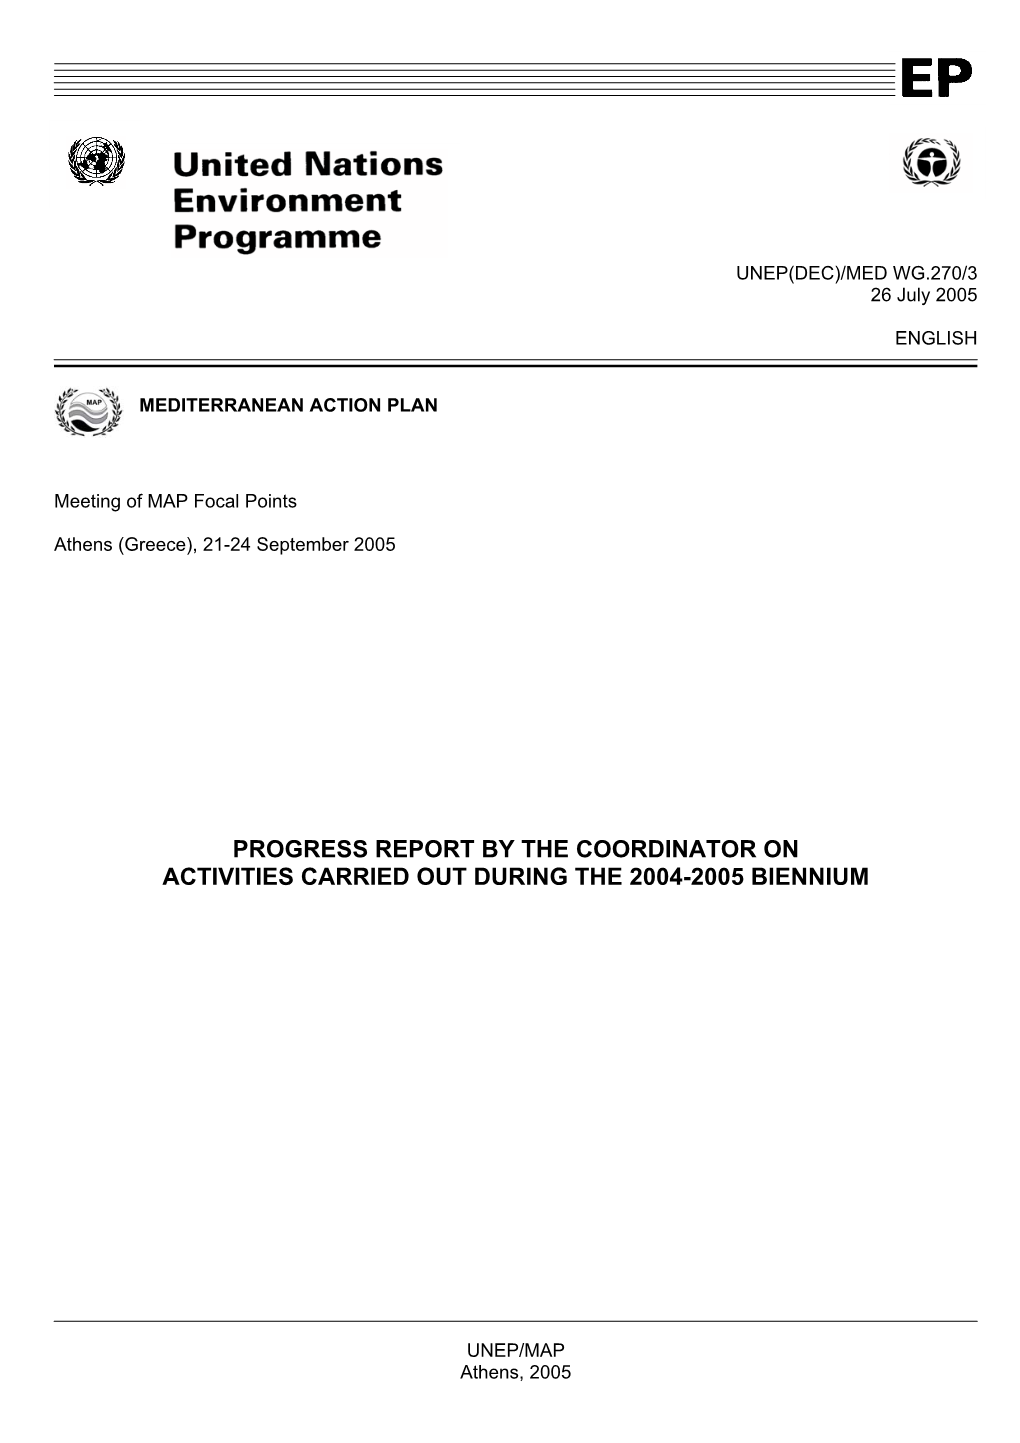 Progress Report by the Coordinator on Activities Carried out During the 2004-2005 Biennium